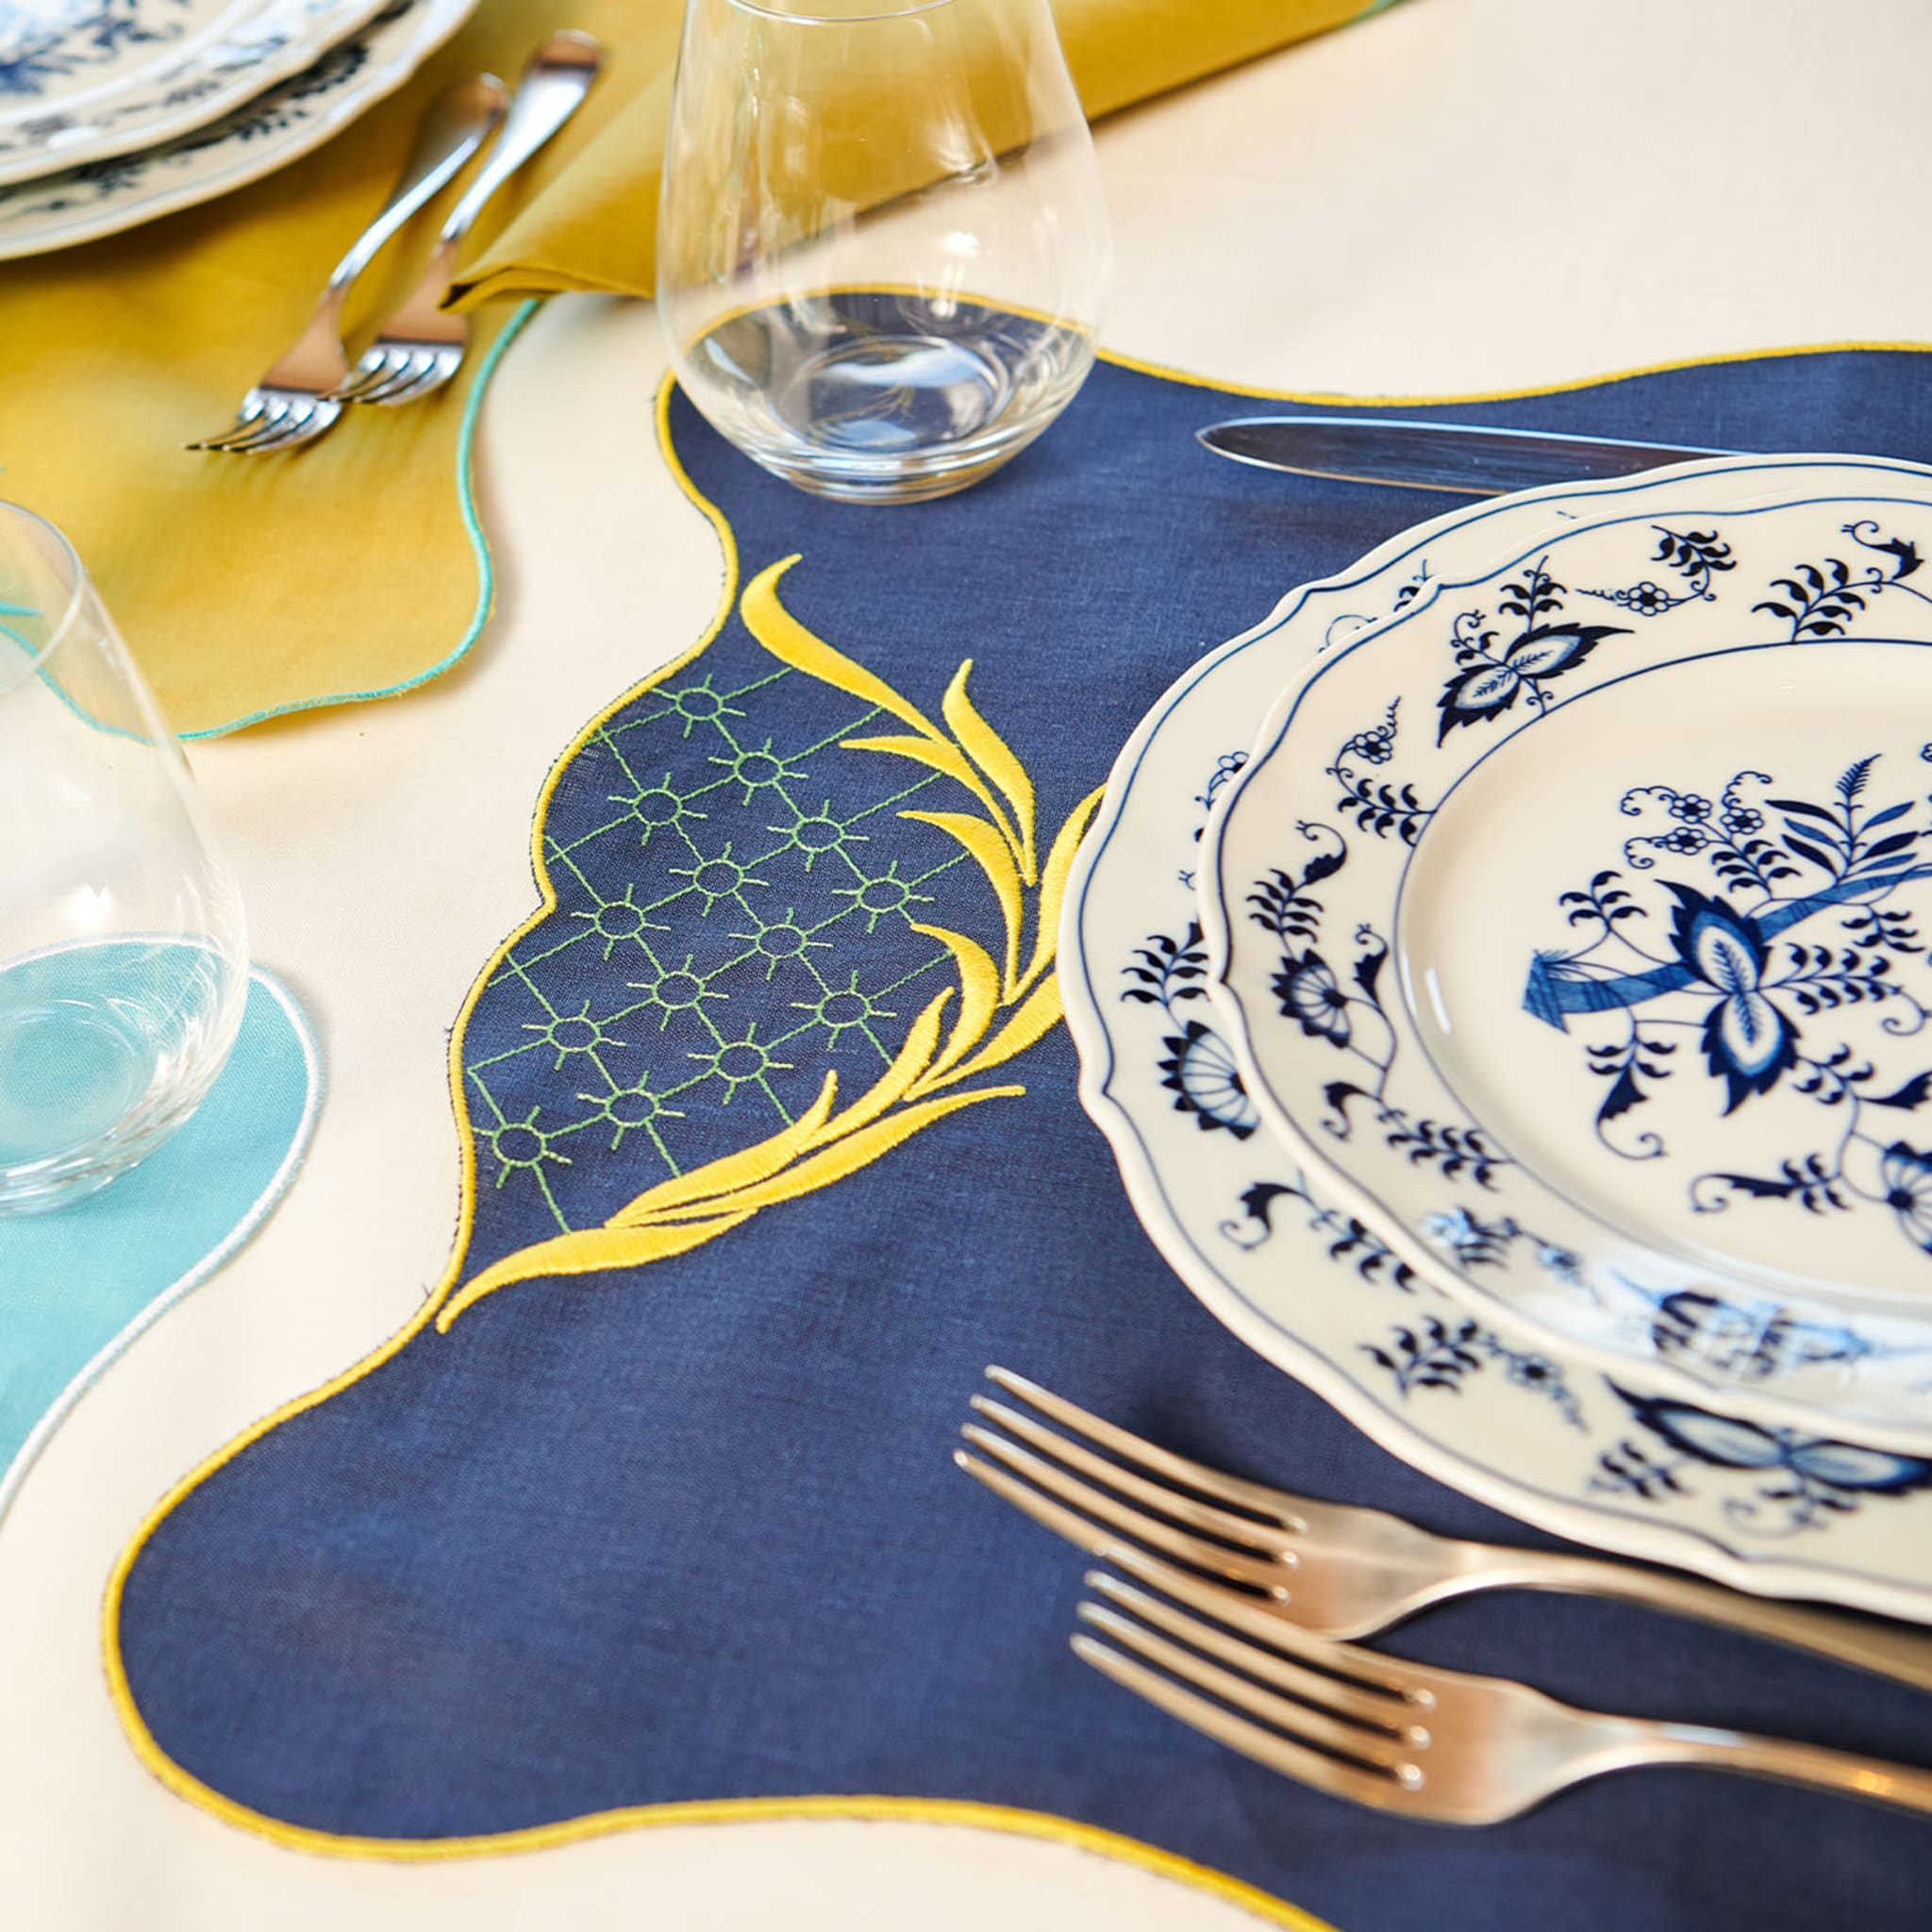 Ananas Blue China and Yellow Dede Place Setting - Alternative view 1